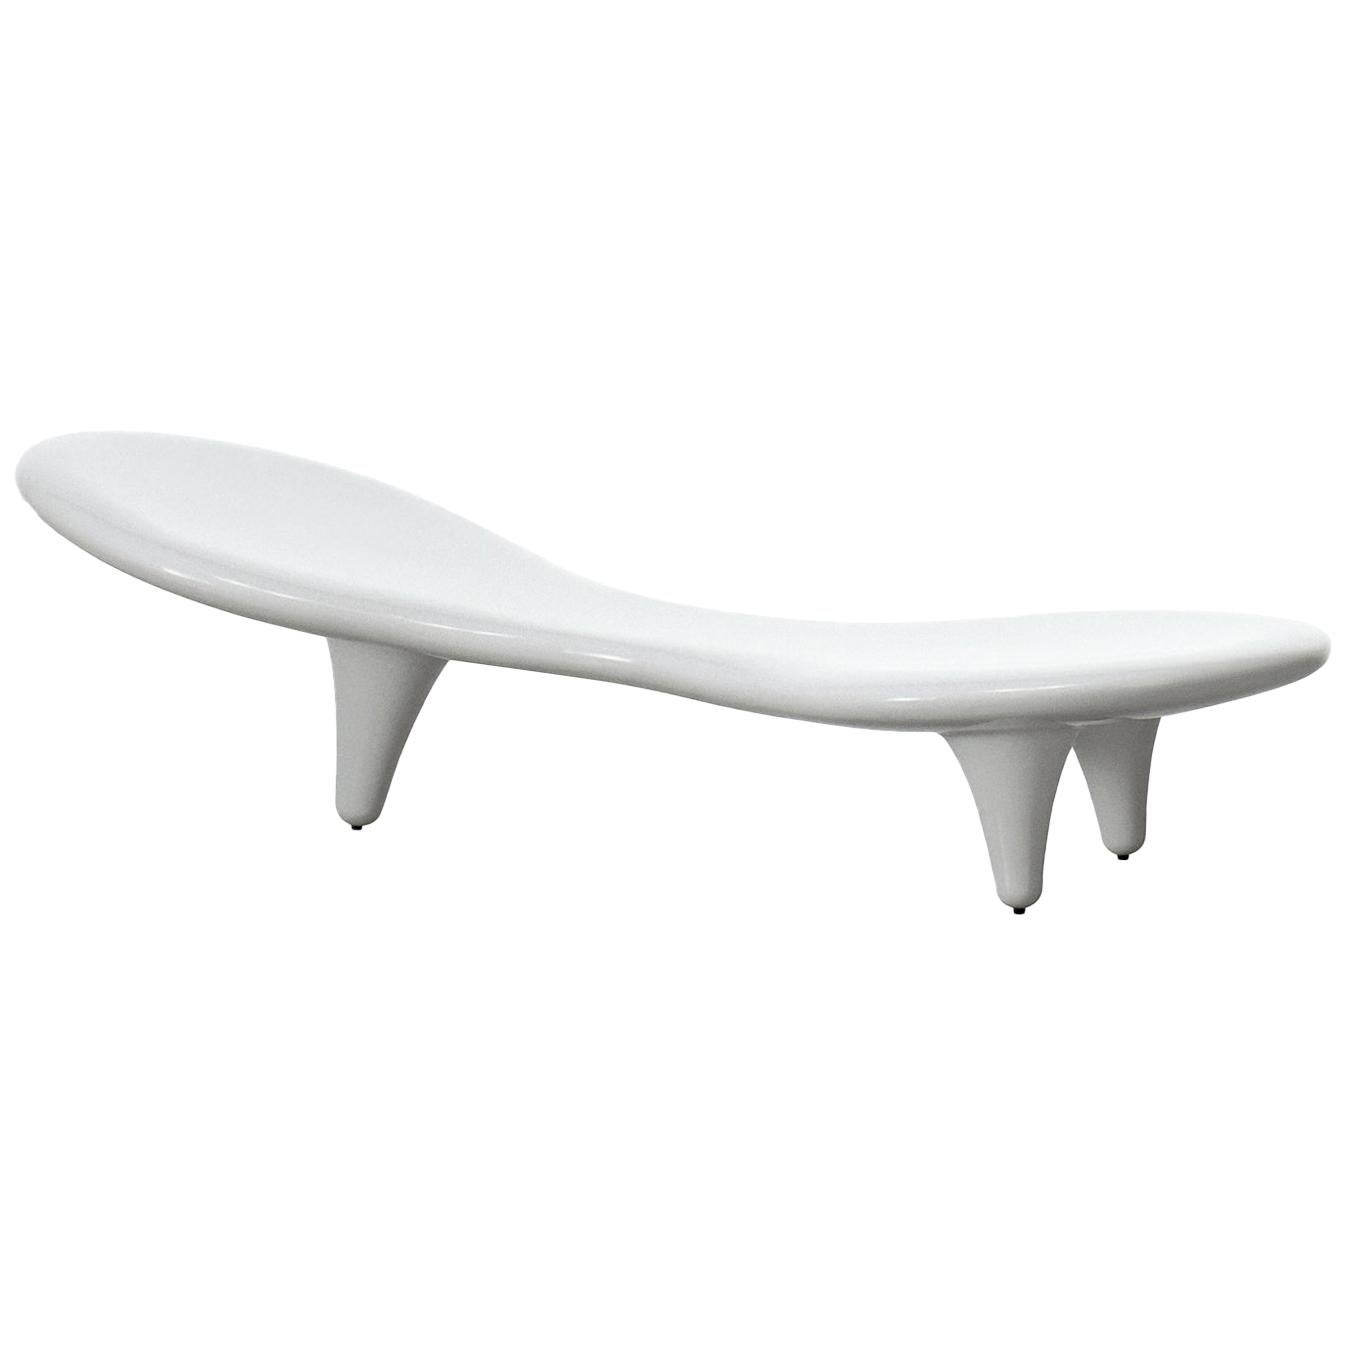 Marc Newson Orgone Chaise Longue in Glossy Lacquered Fiberglass for Cappellini